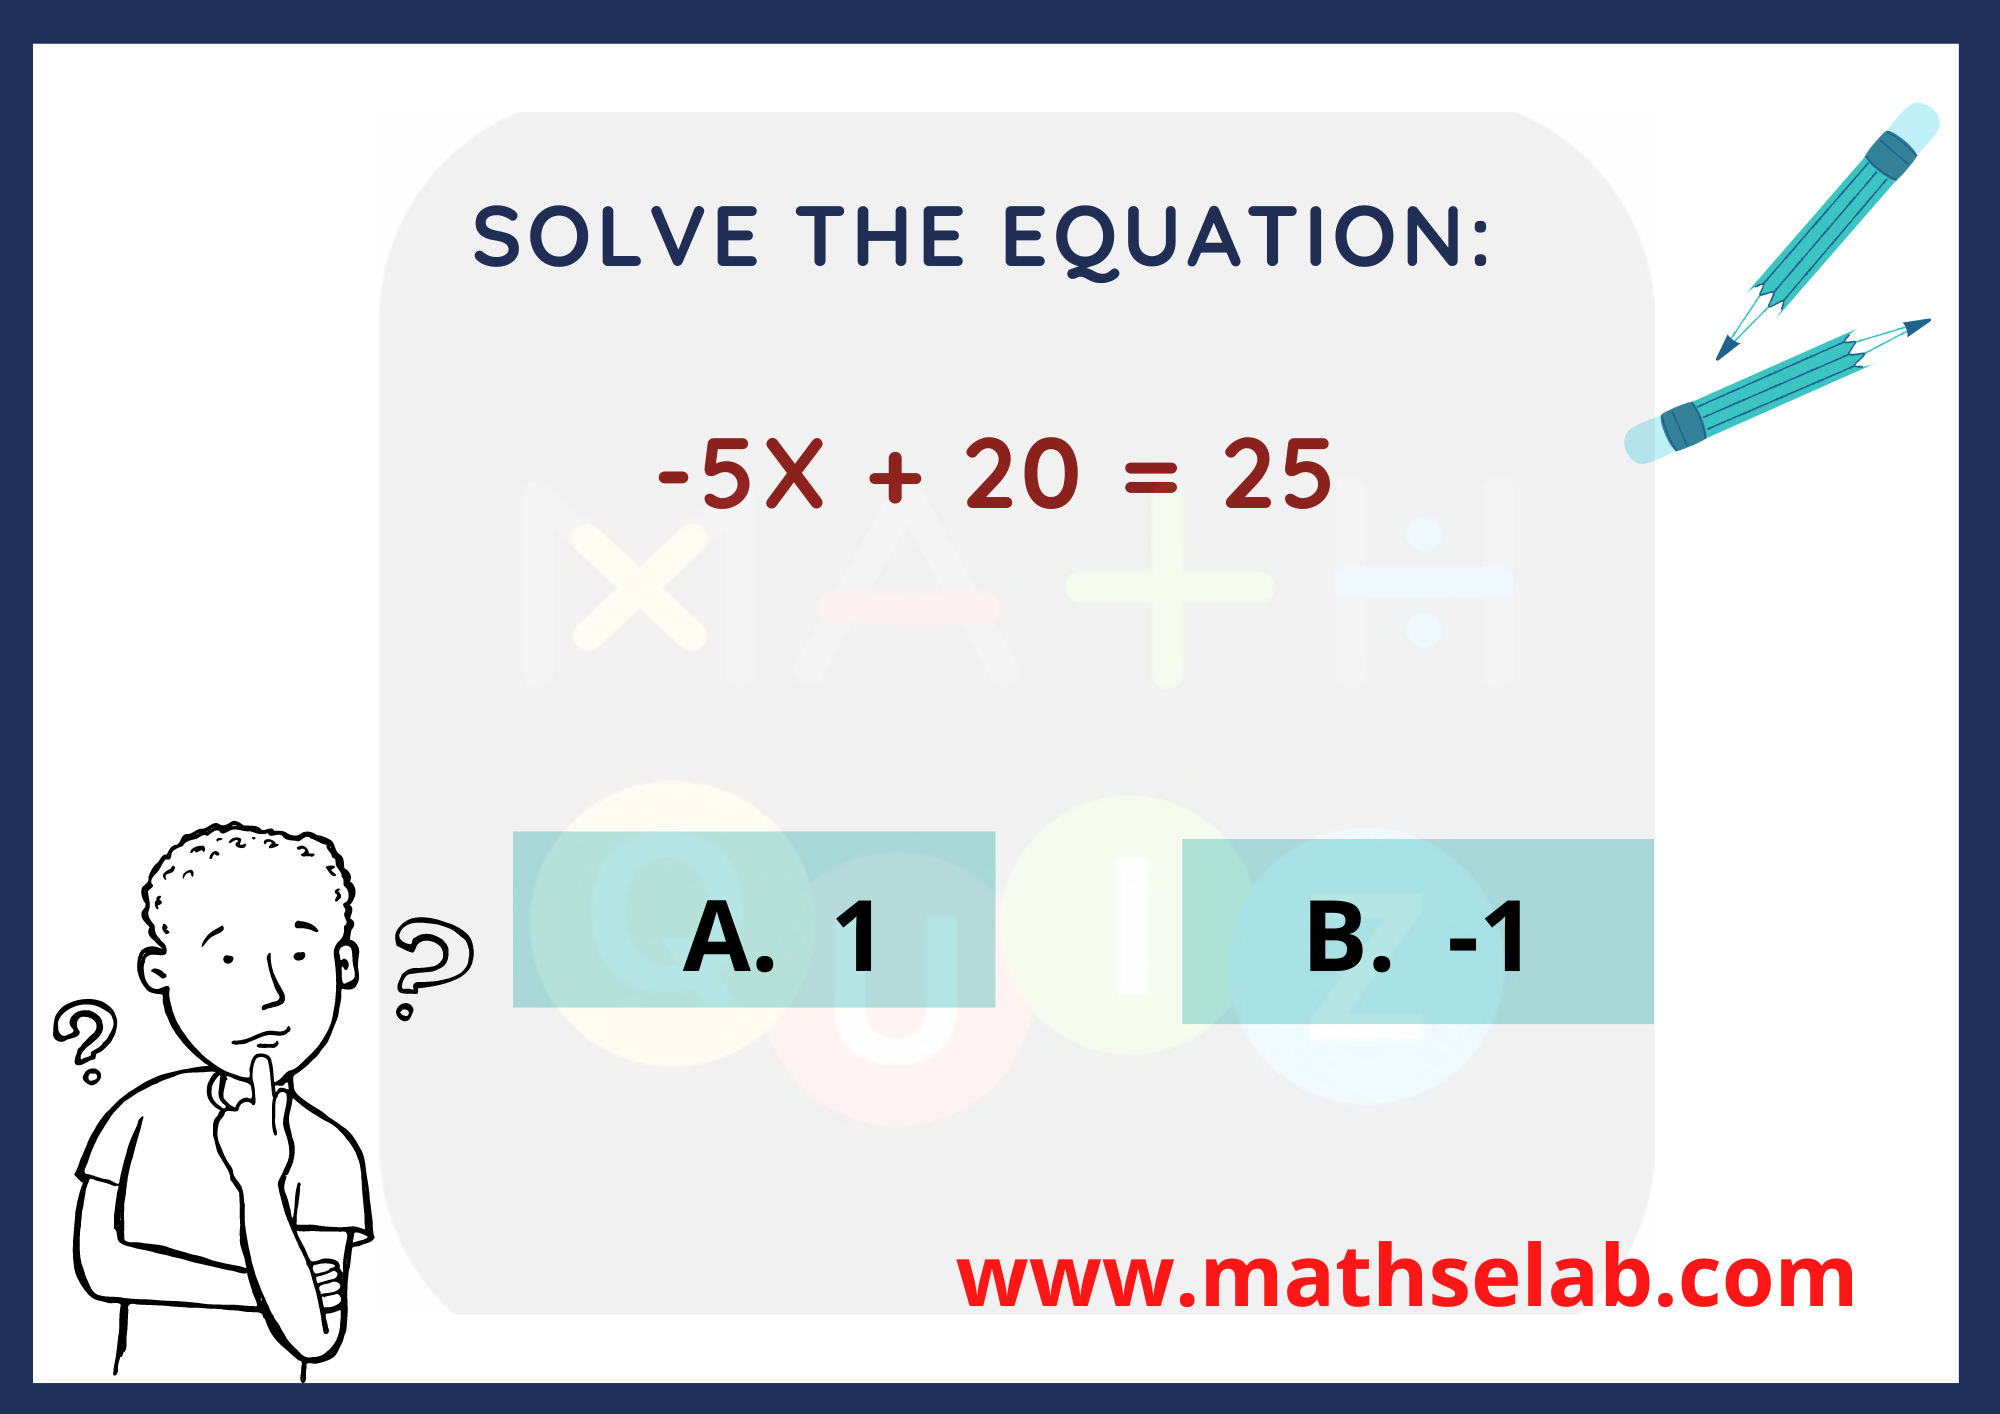 Solve the equation: -5x + 20 = 25